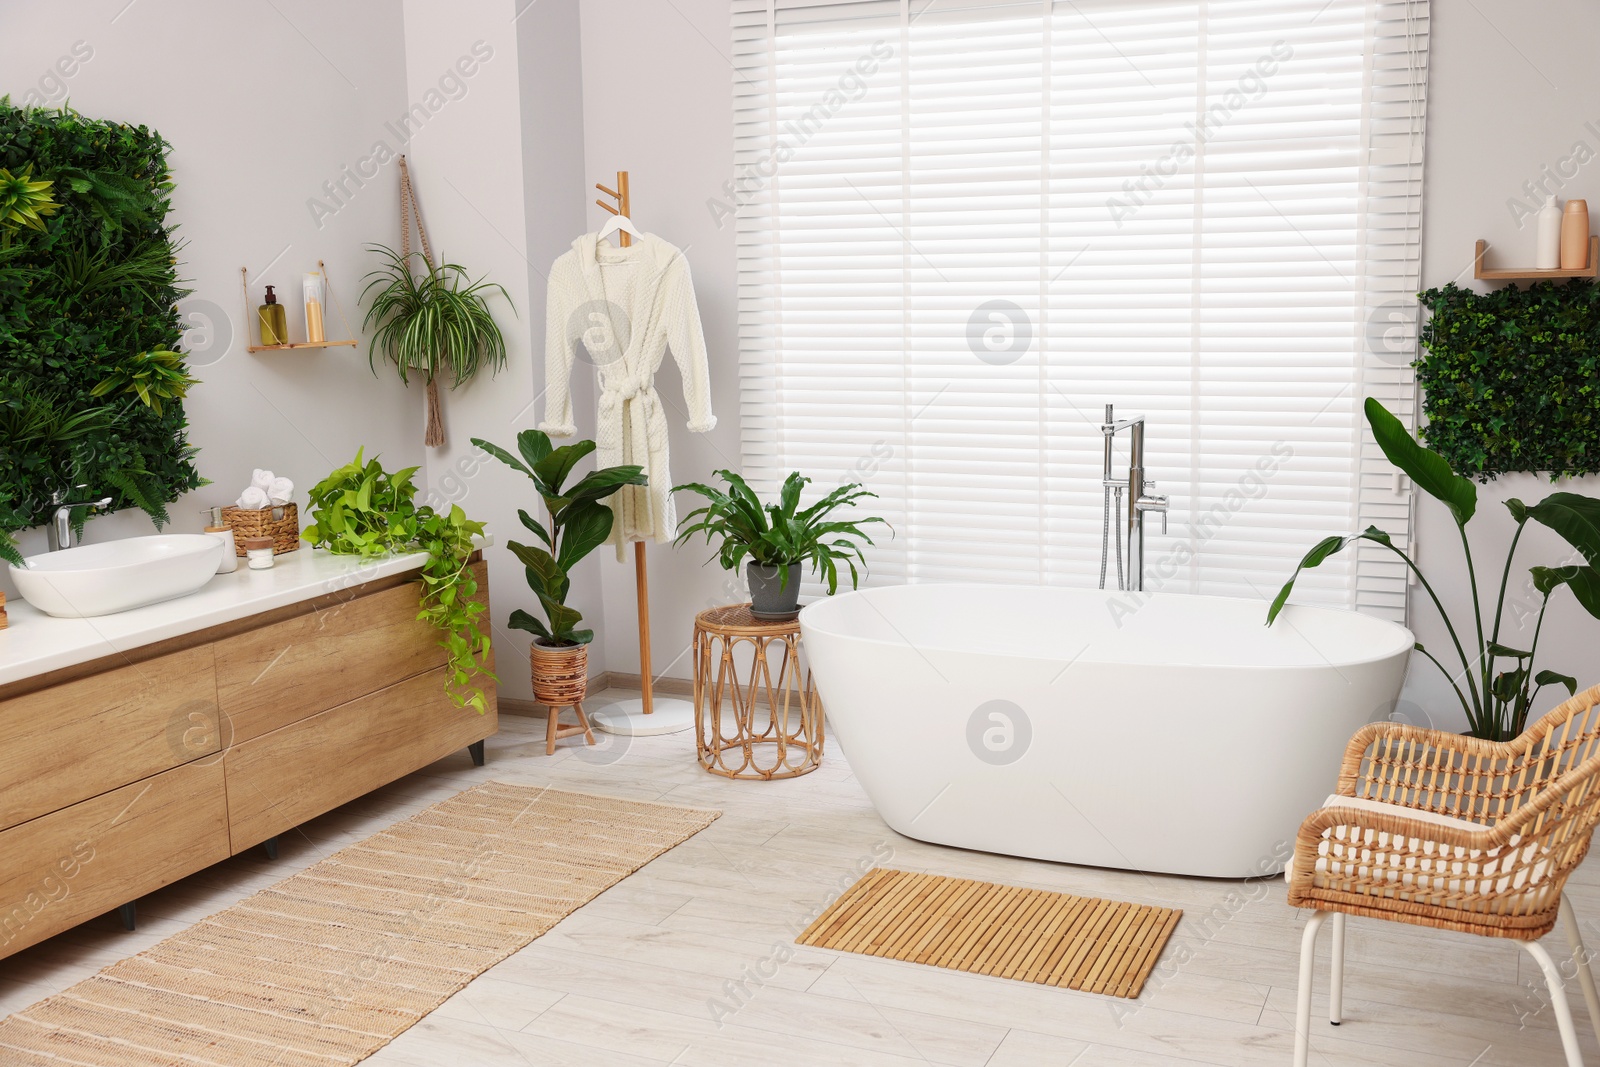 Photo of Green artificial plants, vanity and tub in bathroom